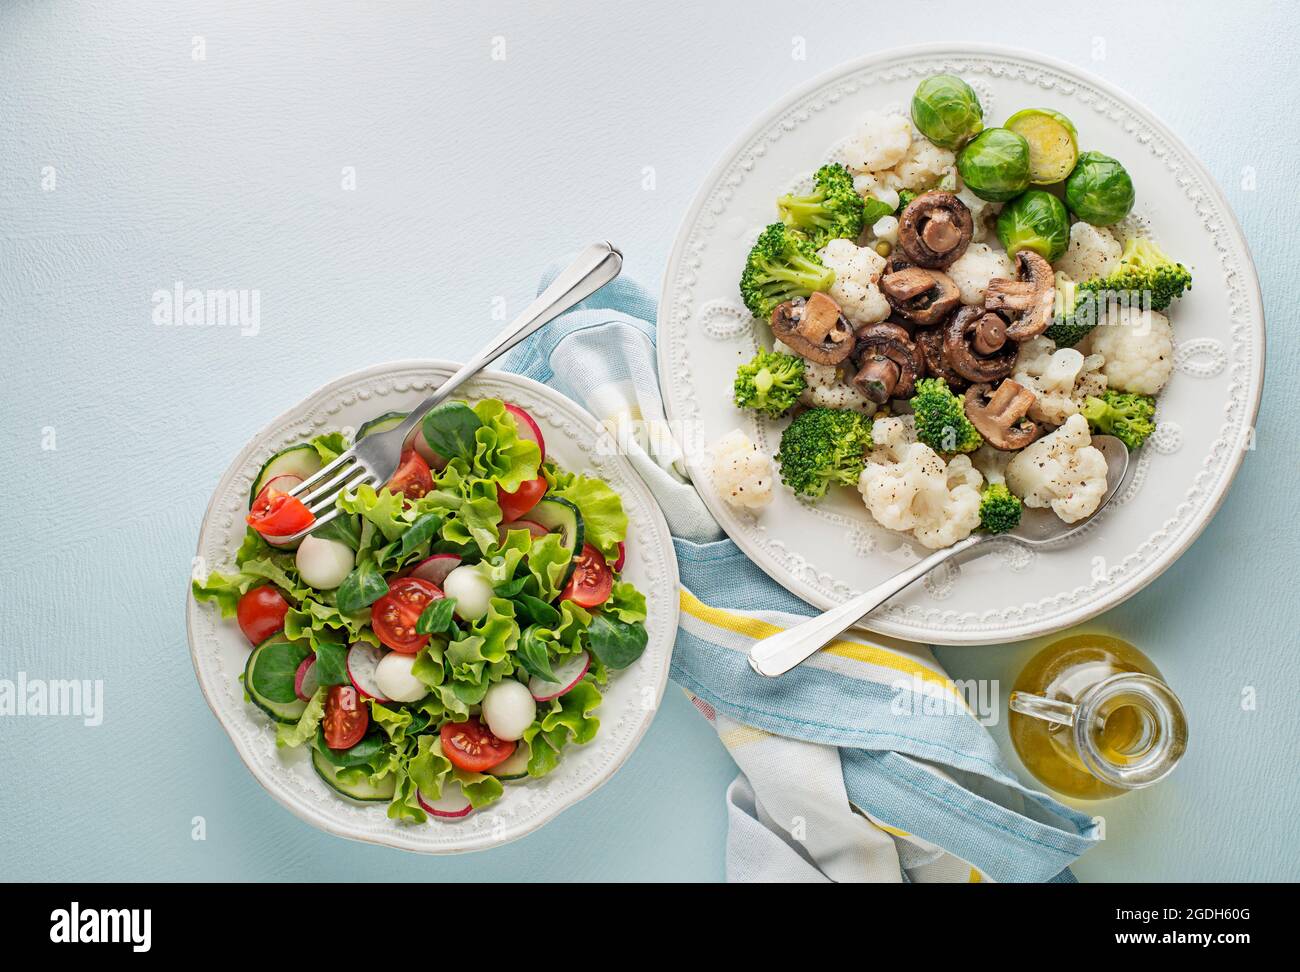 Healthy salad meals with cooked vegetable and fresh lettuce salad. Healthy vegetable diet meal. Stock Photo